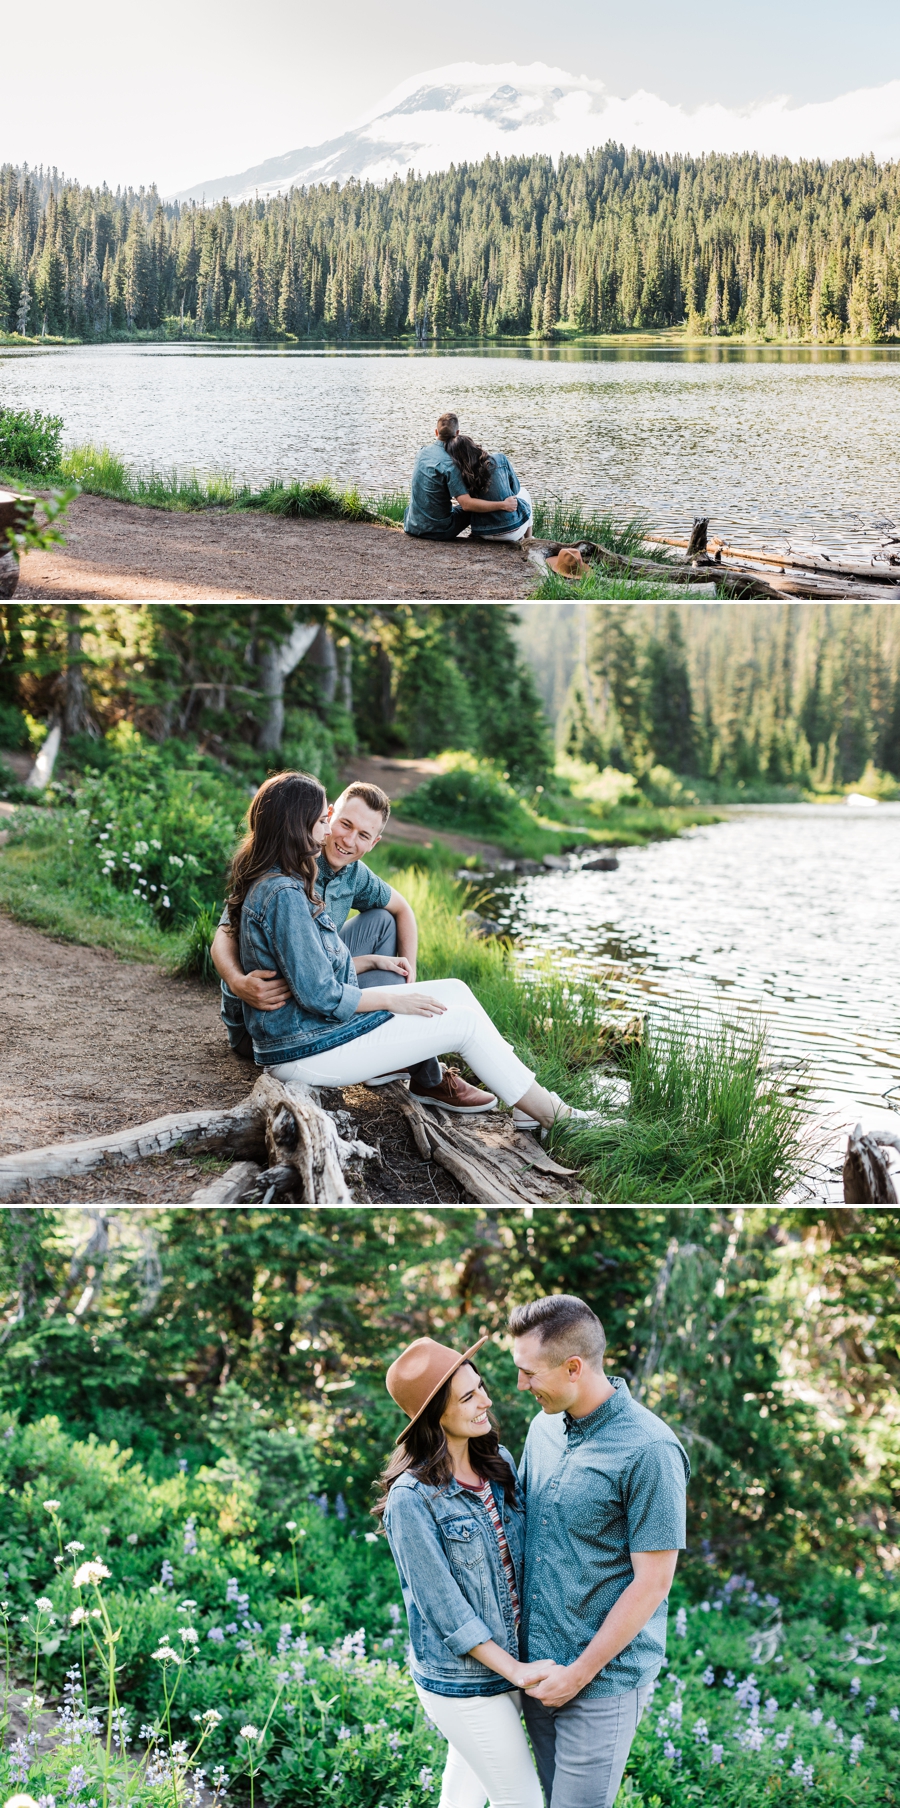 Engagement photos at Reflection Lake in Mt Rainier National Park by Seattle mountain wedding photographer Amy Galbraith